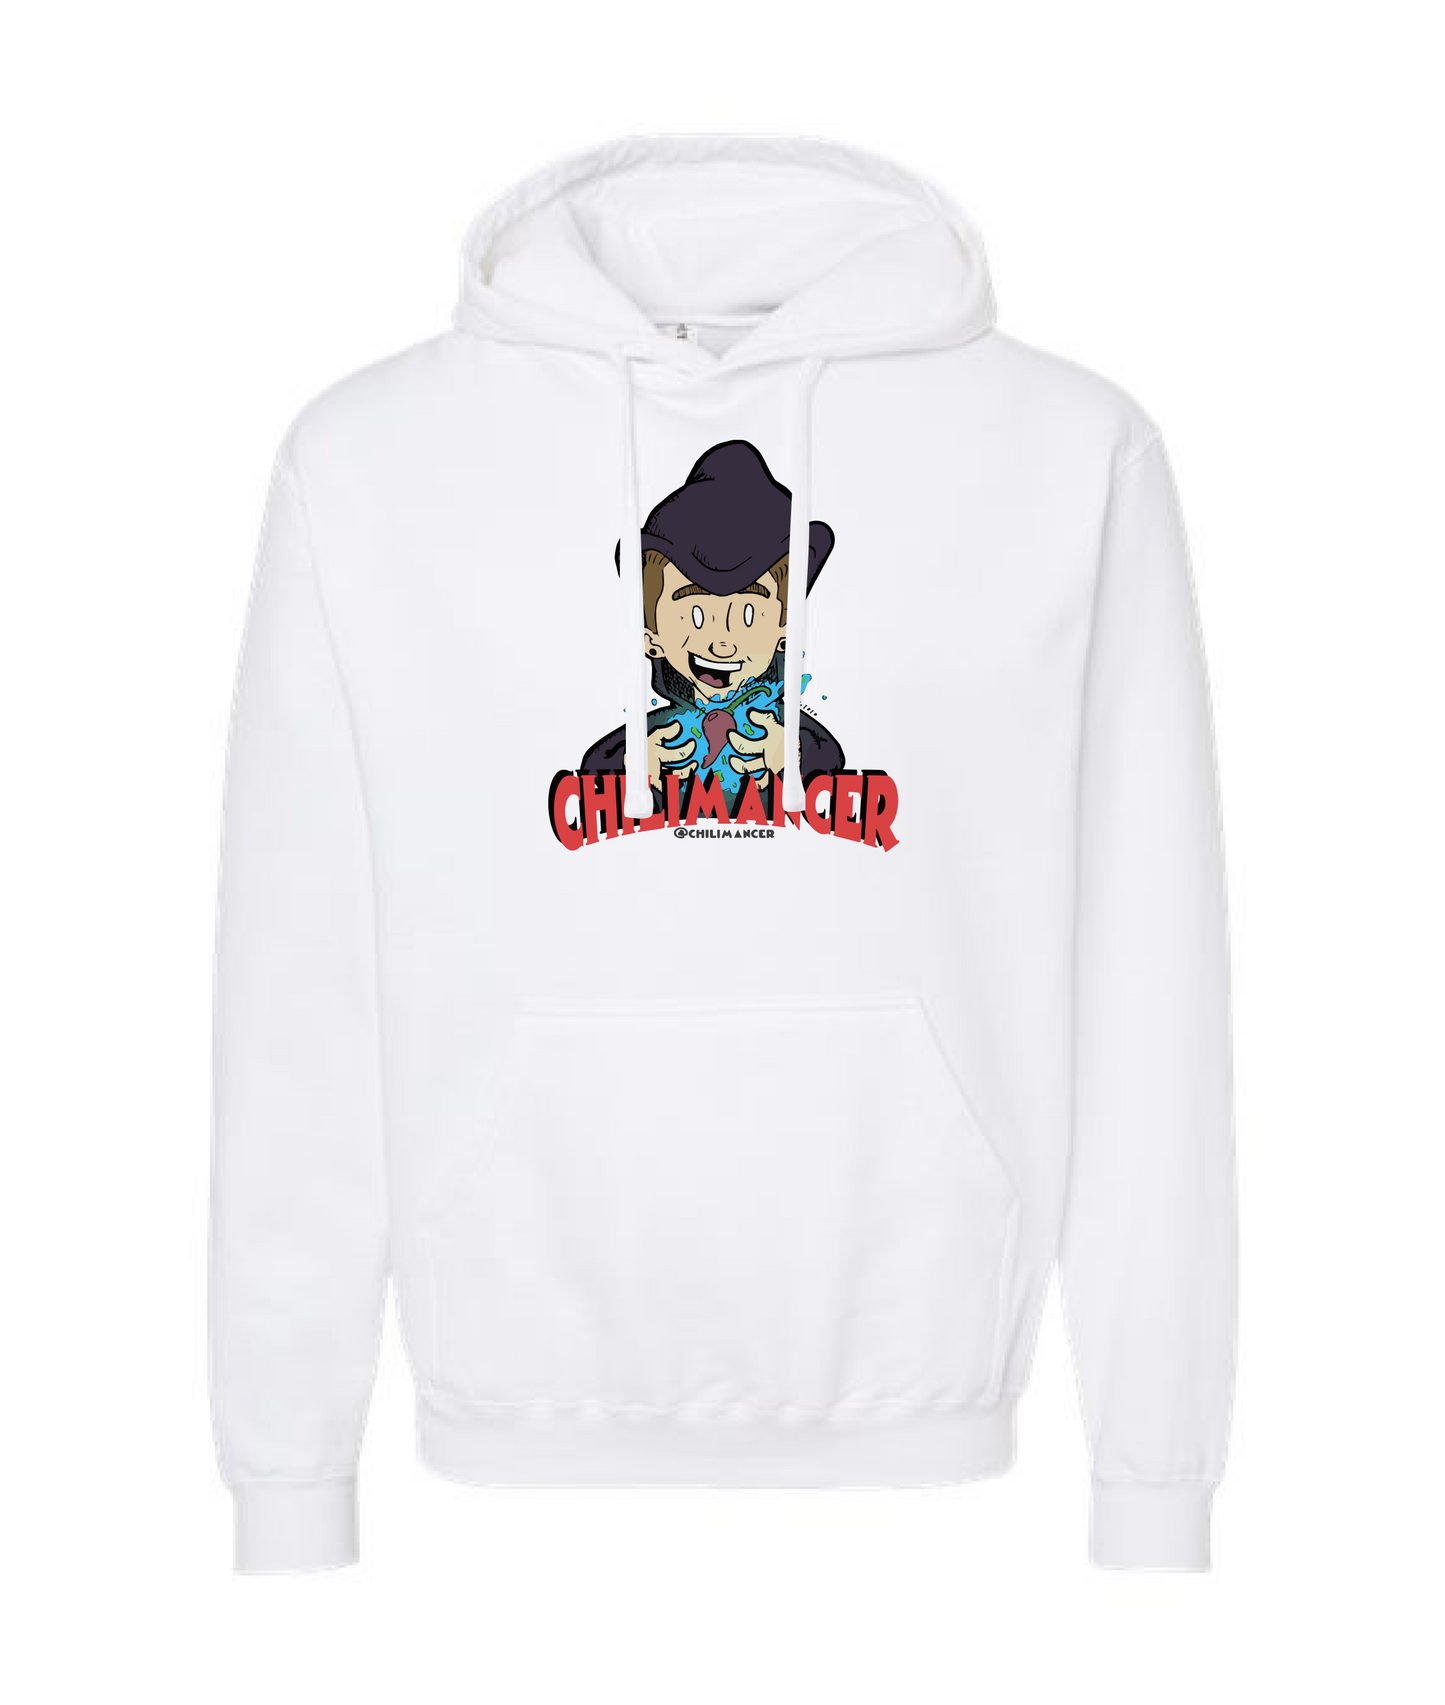 Chilimancer - Chili Eater - White Hoodie